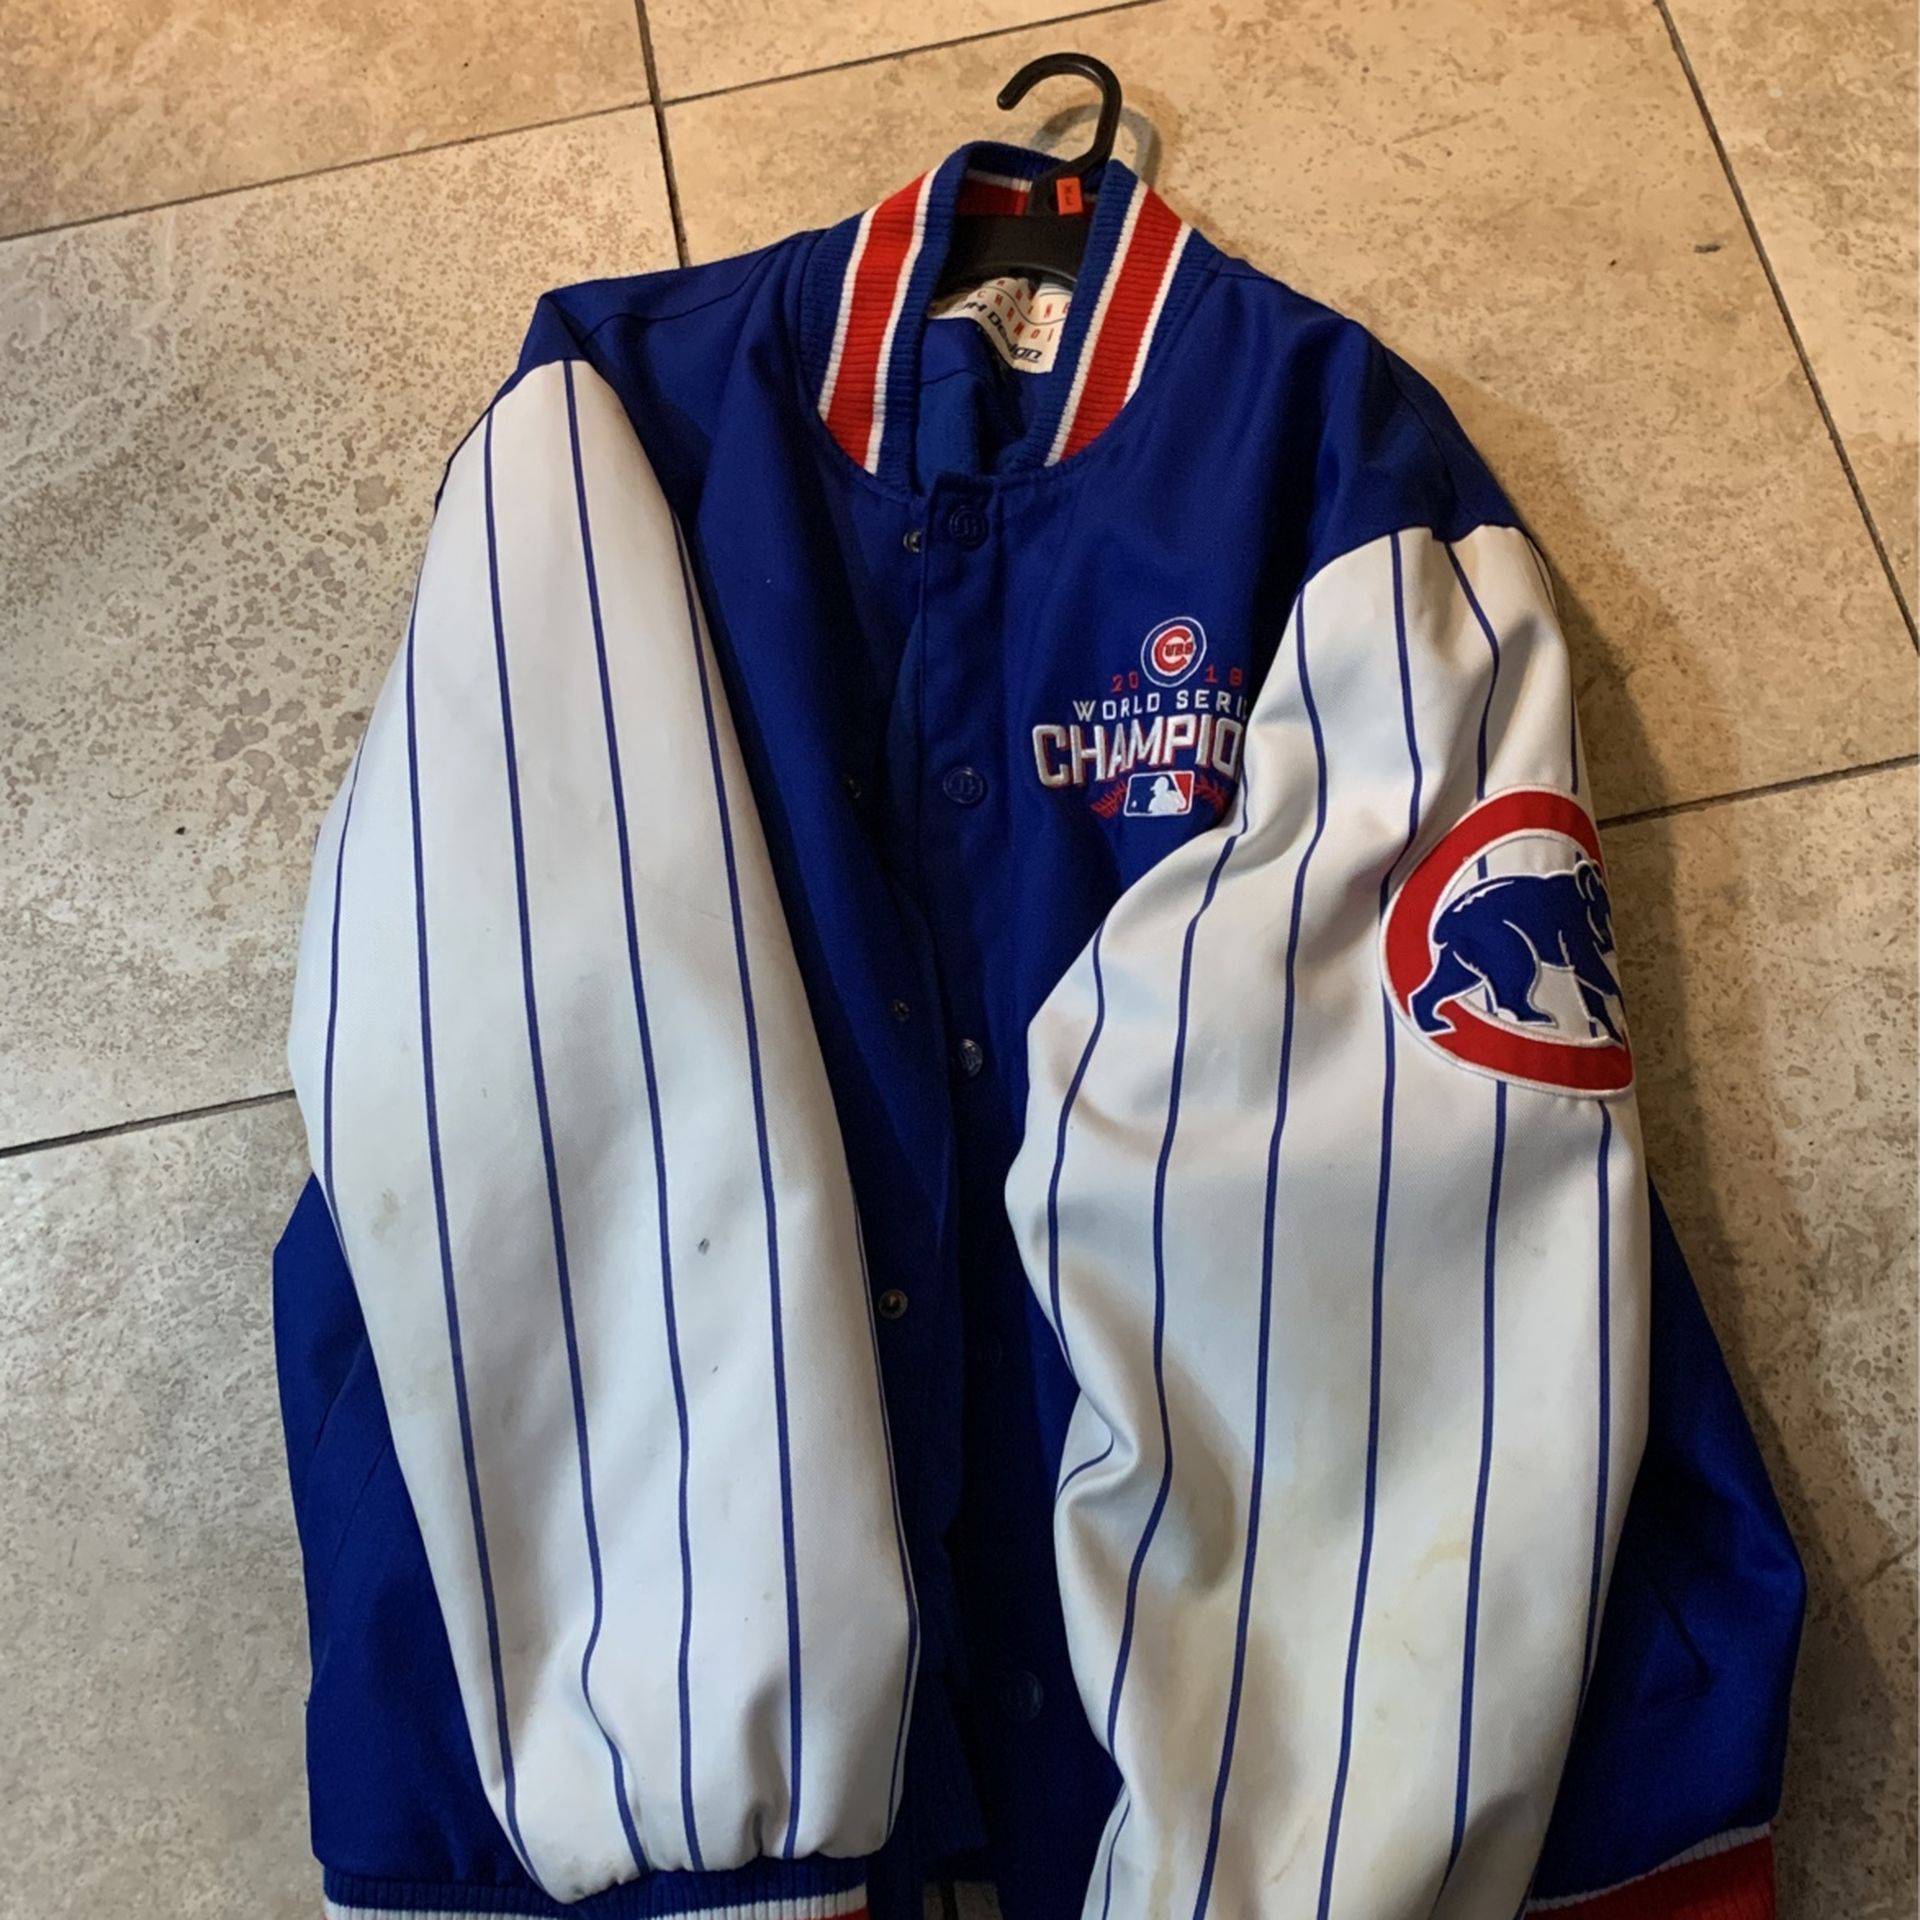 Brand new authentic Chicago cubs jackets retail price is $500 I am only asking for 275 or best offer willing to negotiate size extra large